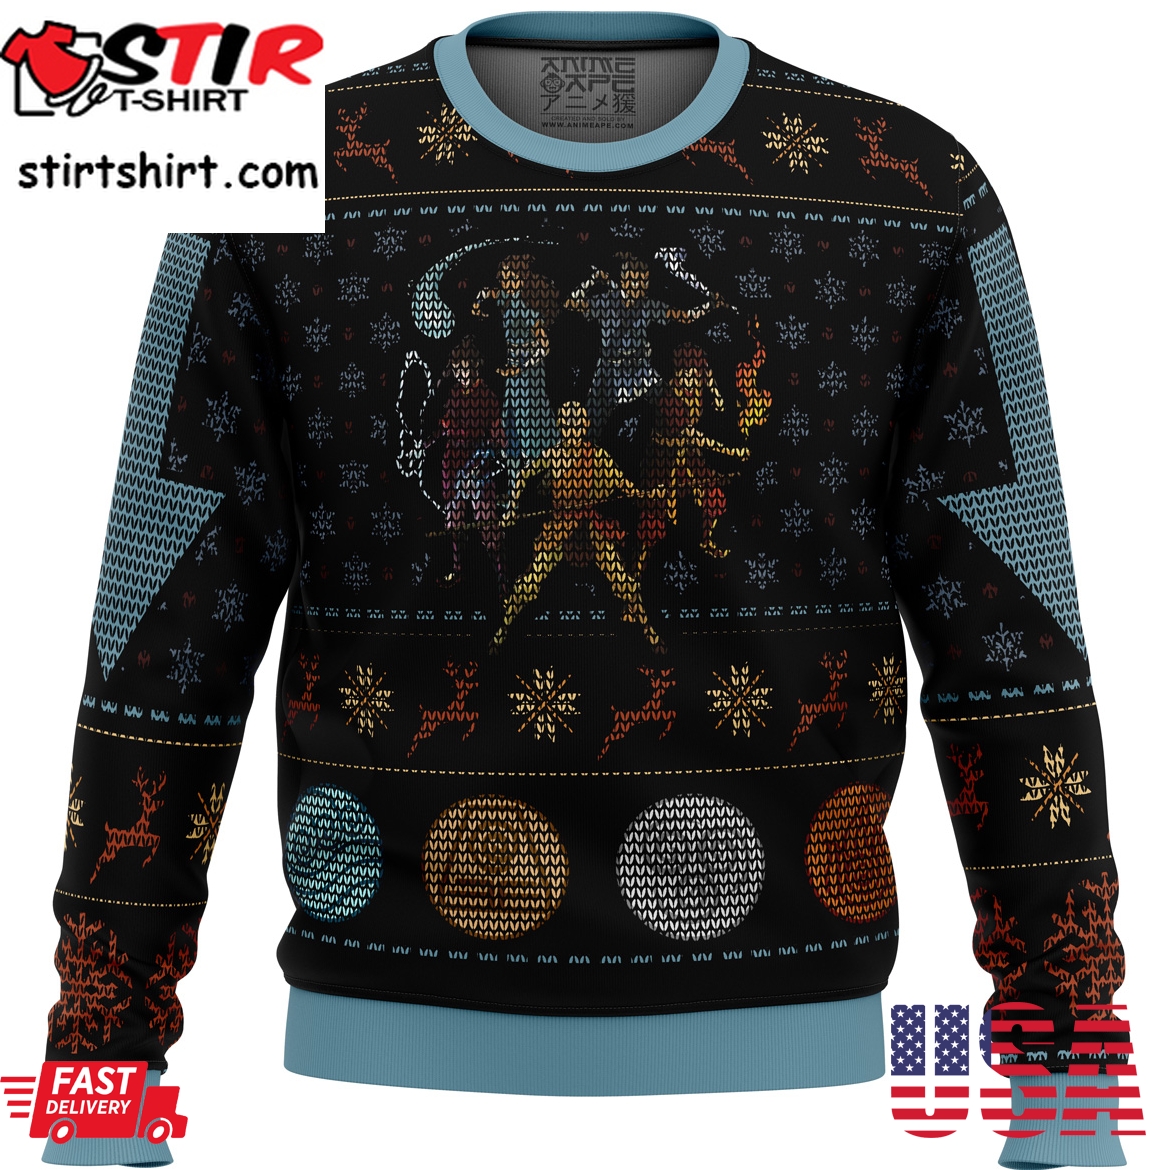 Avatar The Last Airbender Ugly Christmas Sweater